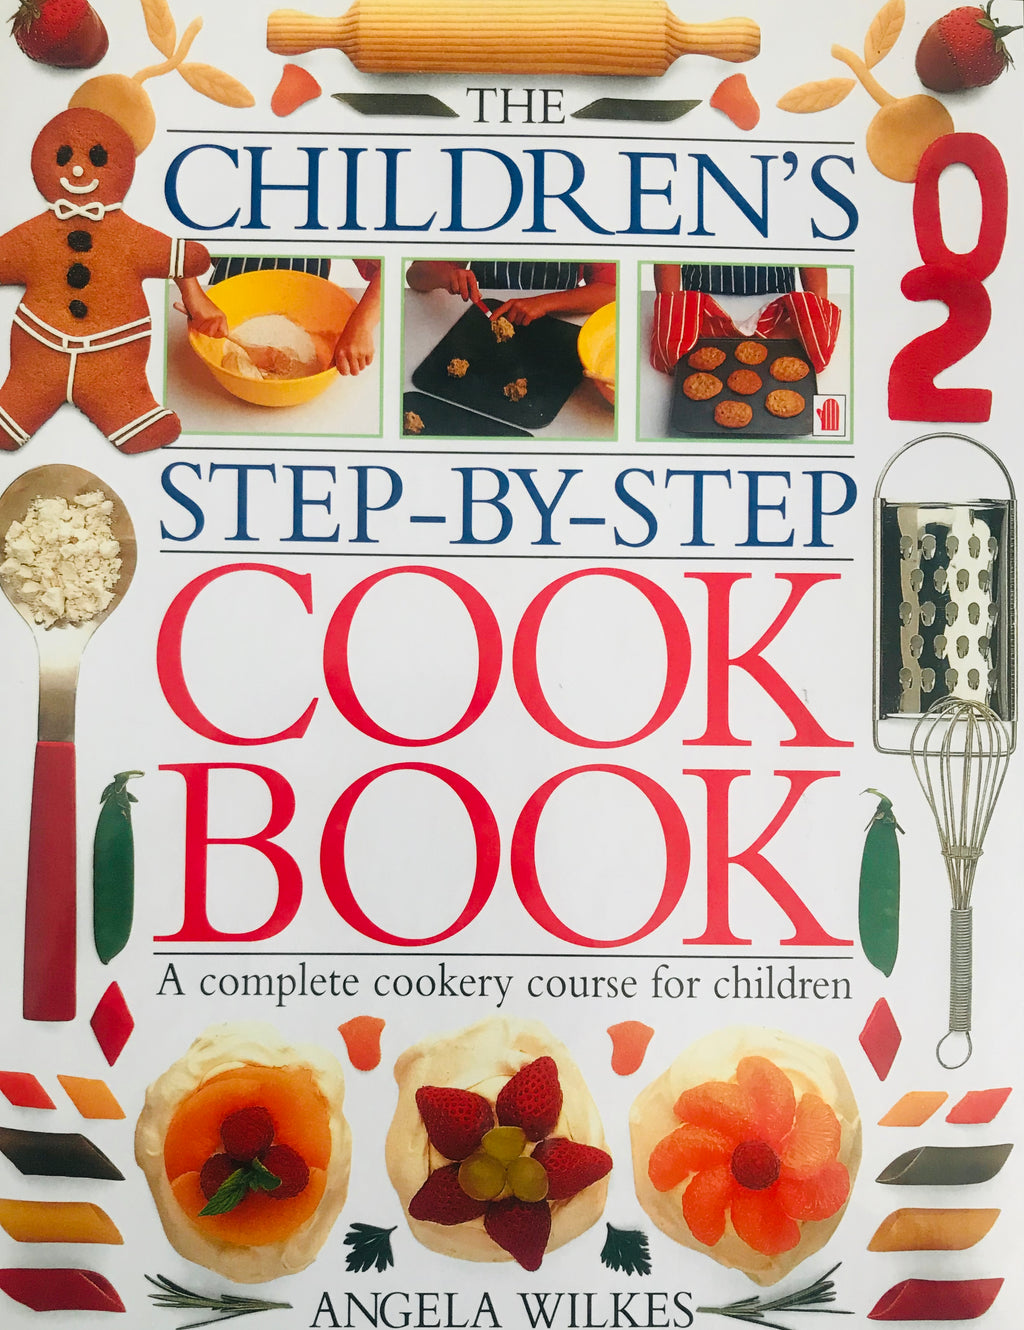 Children's Step-by-step Cook Book, The